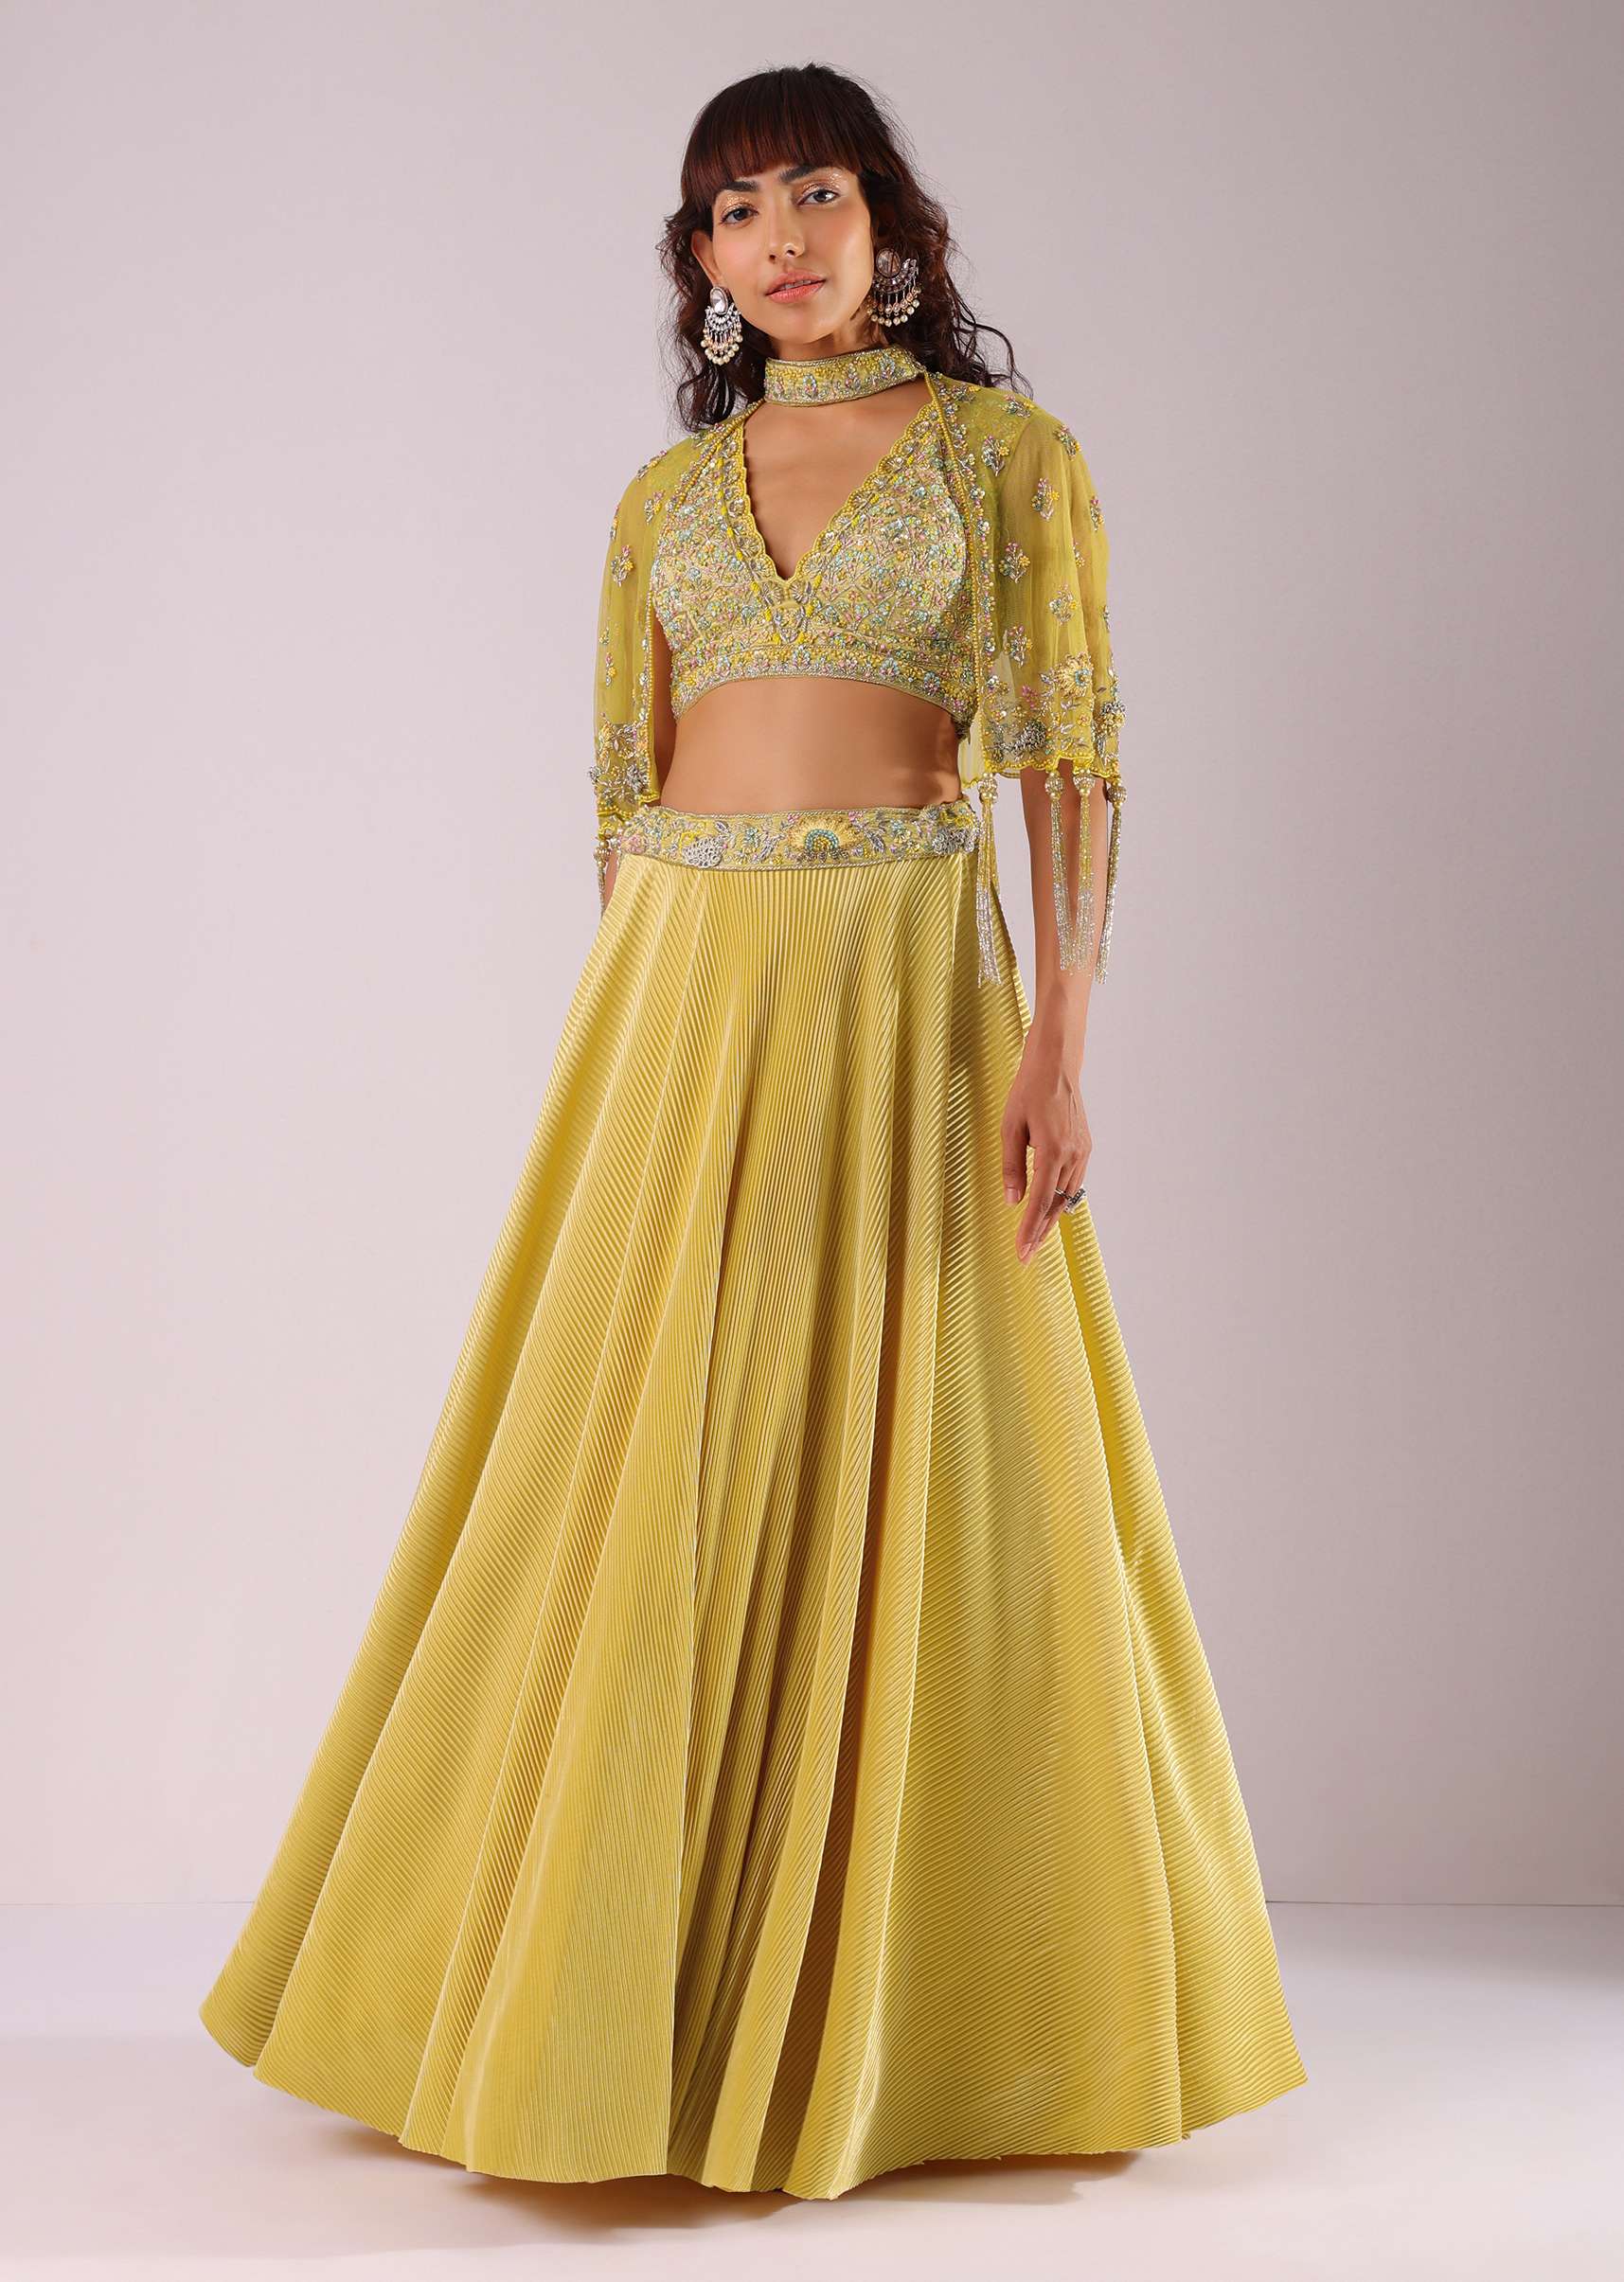 Lemon Yellow Embroidered Lehenga Set In Knit Fabric With Net Cape